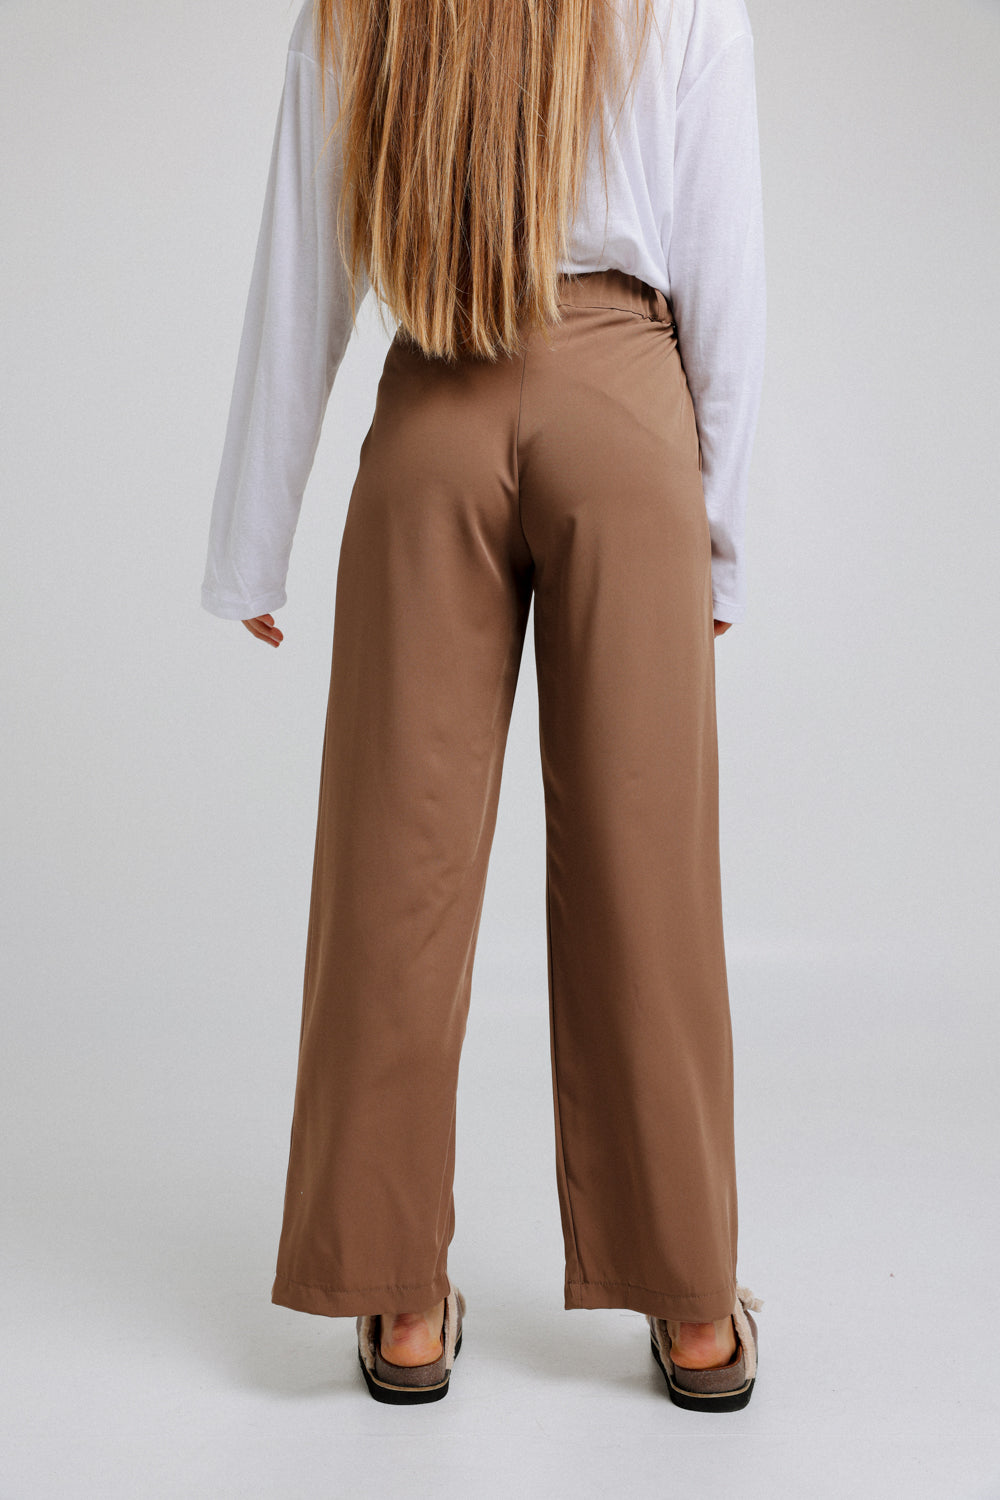 Look At These Camel Bottoms